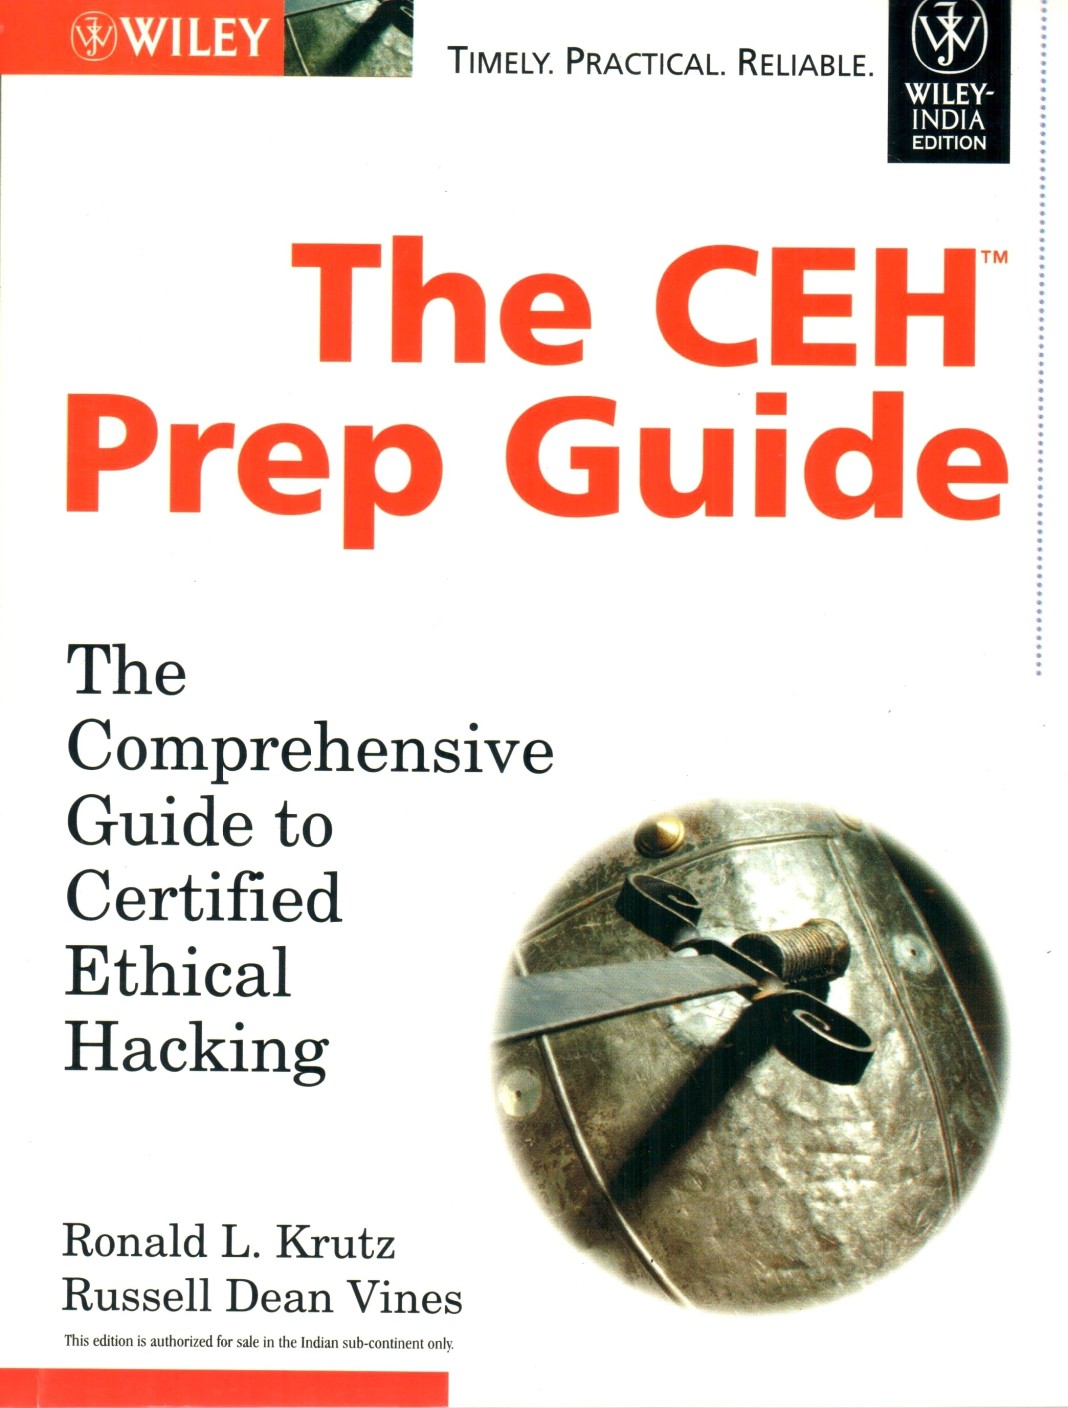 The CEH Prep Guide The Comprehensive Guide To Certified Ethical Hacking